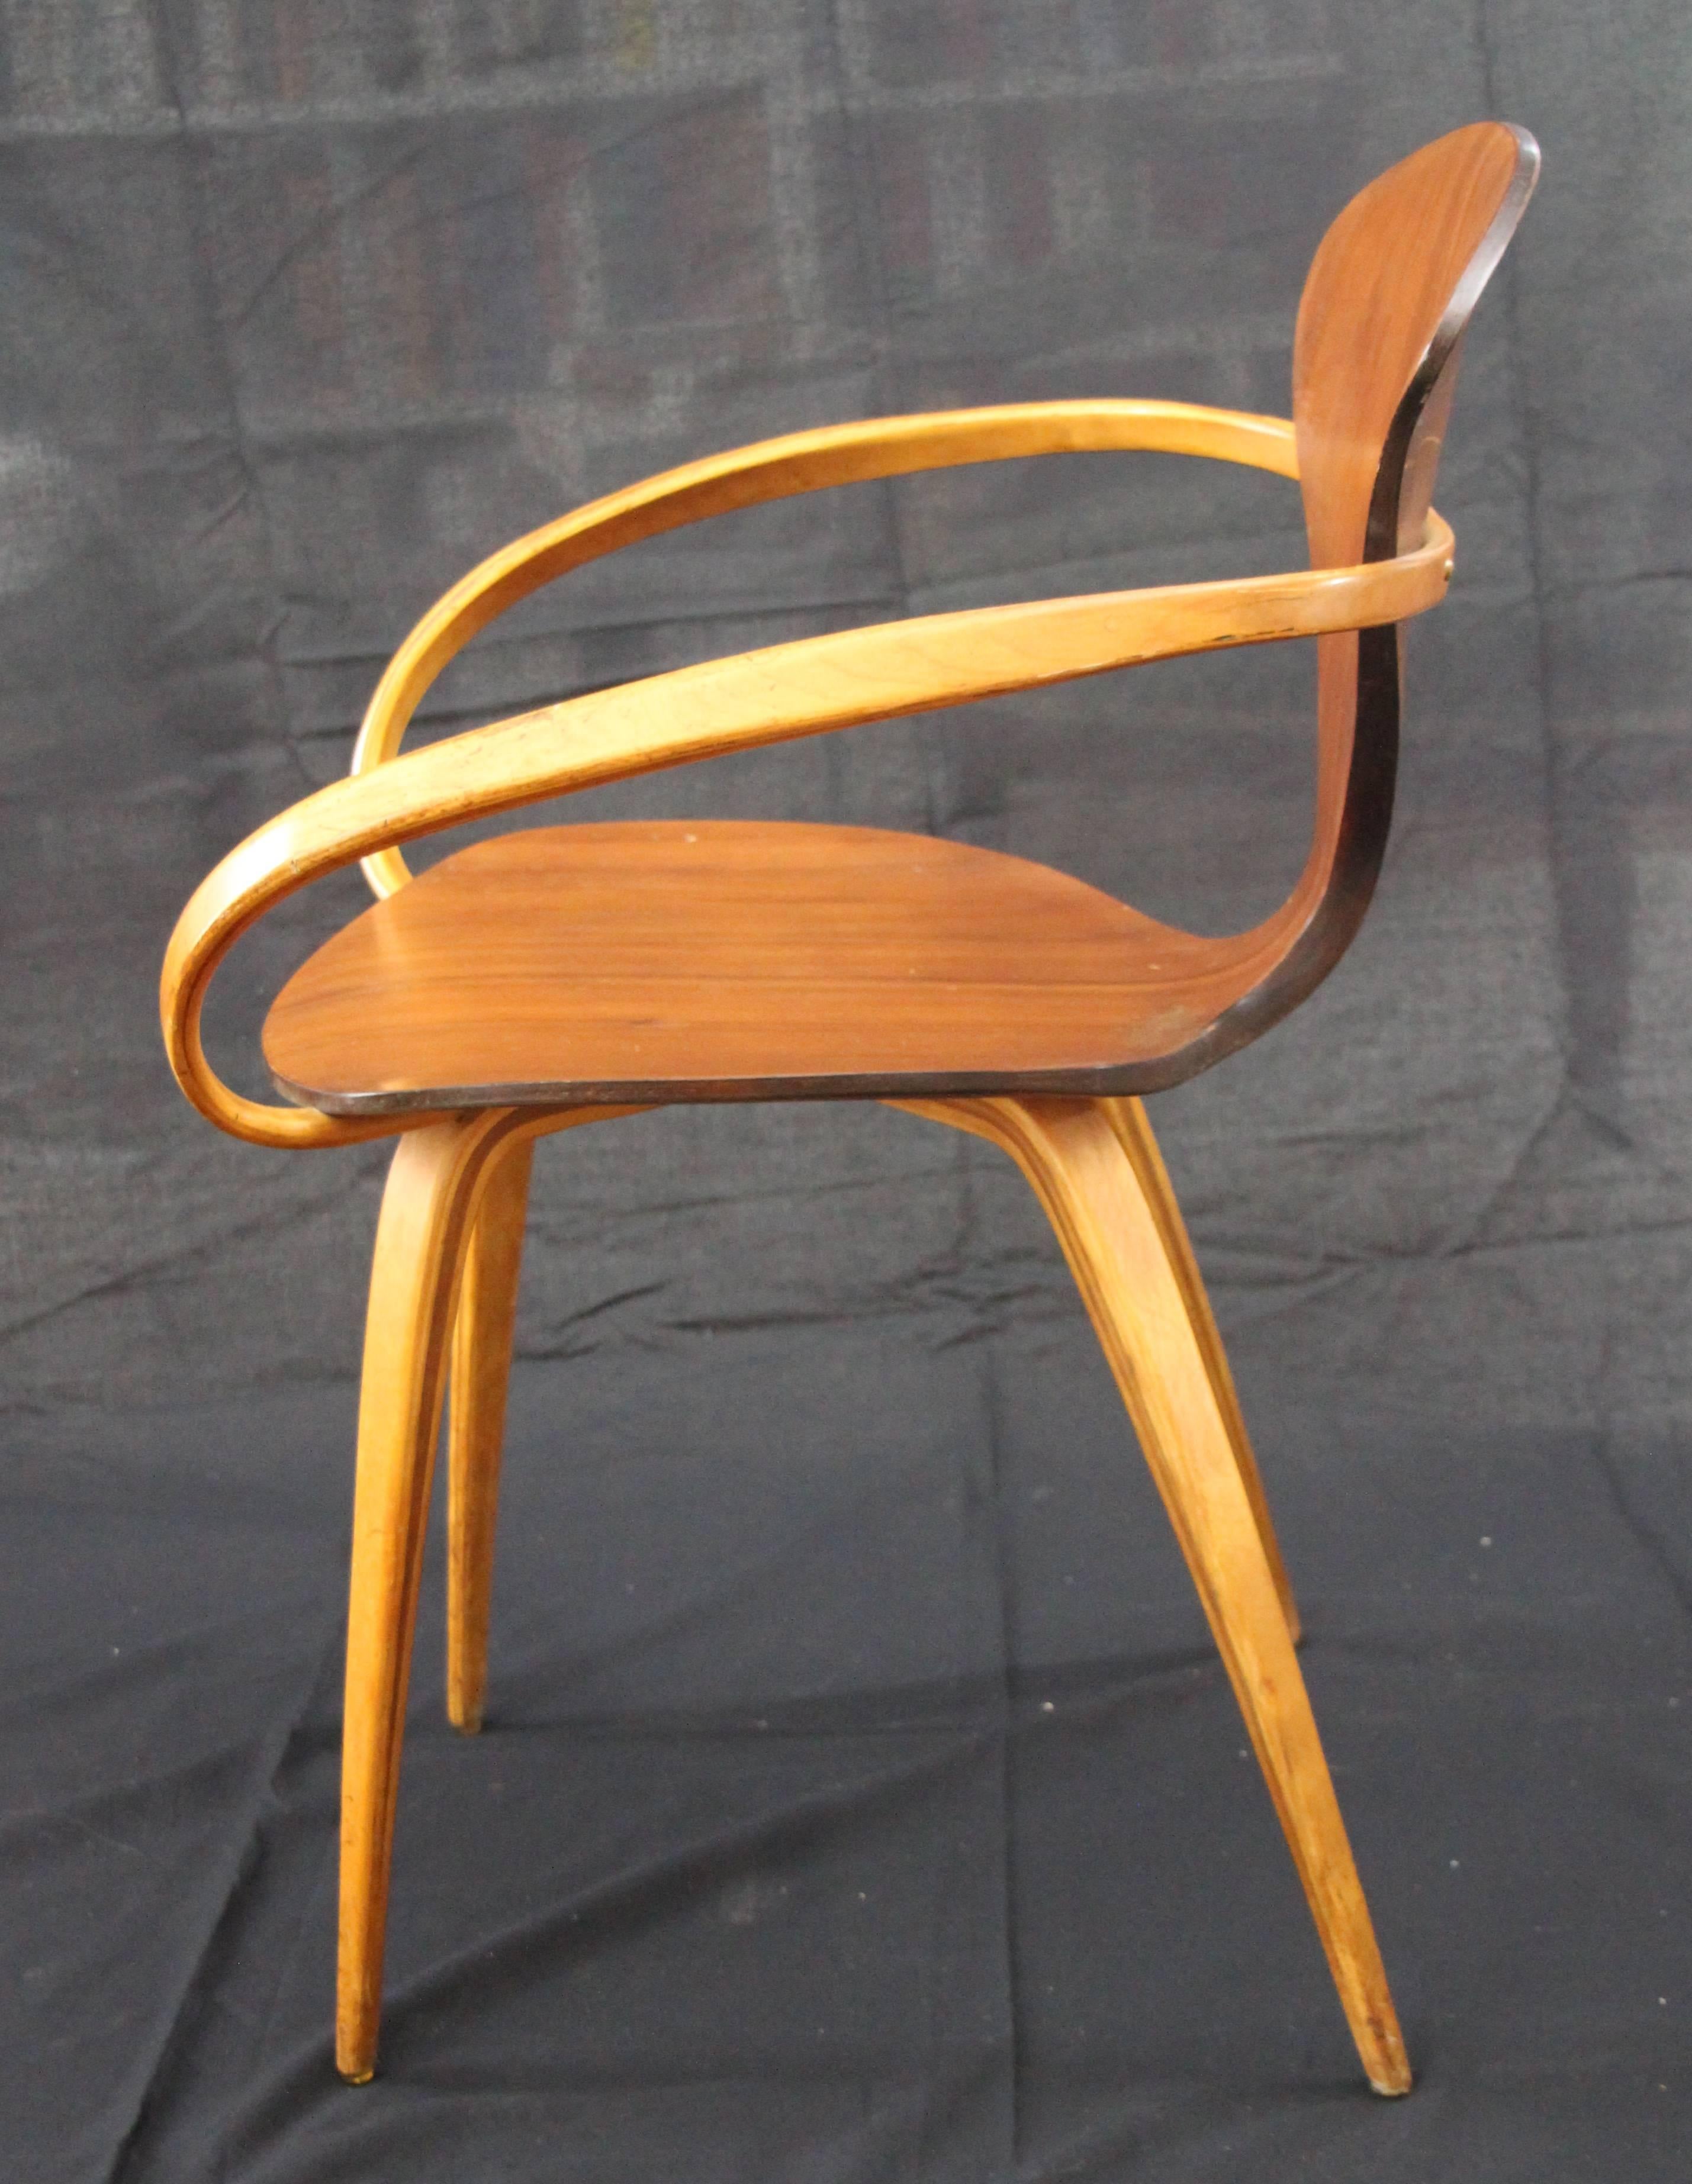 Midcentury armchair in walnut and beech. The chair was designed in the late 1950s by Norman Cherner (1920-1987) for Plycraft. Even though Plycraft told Cherner that the design would not be produced, the company started the production as its own